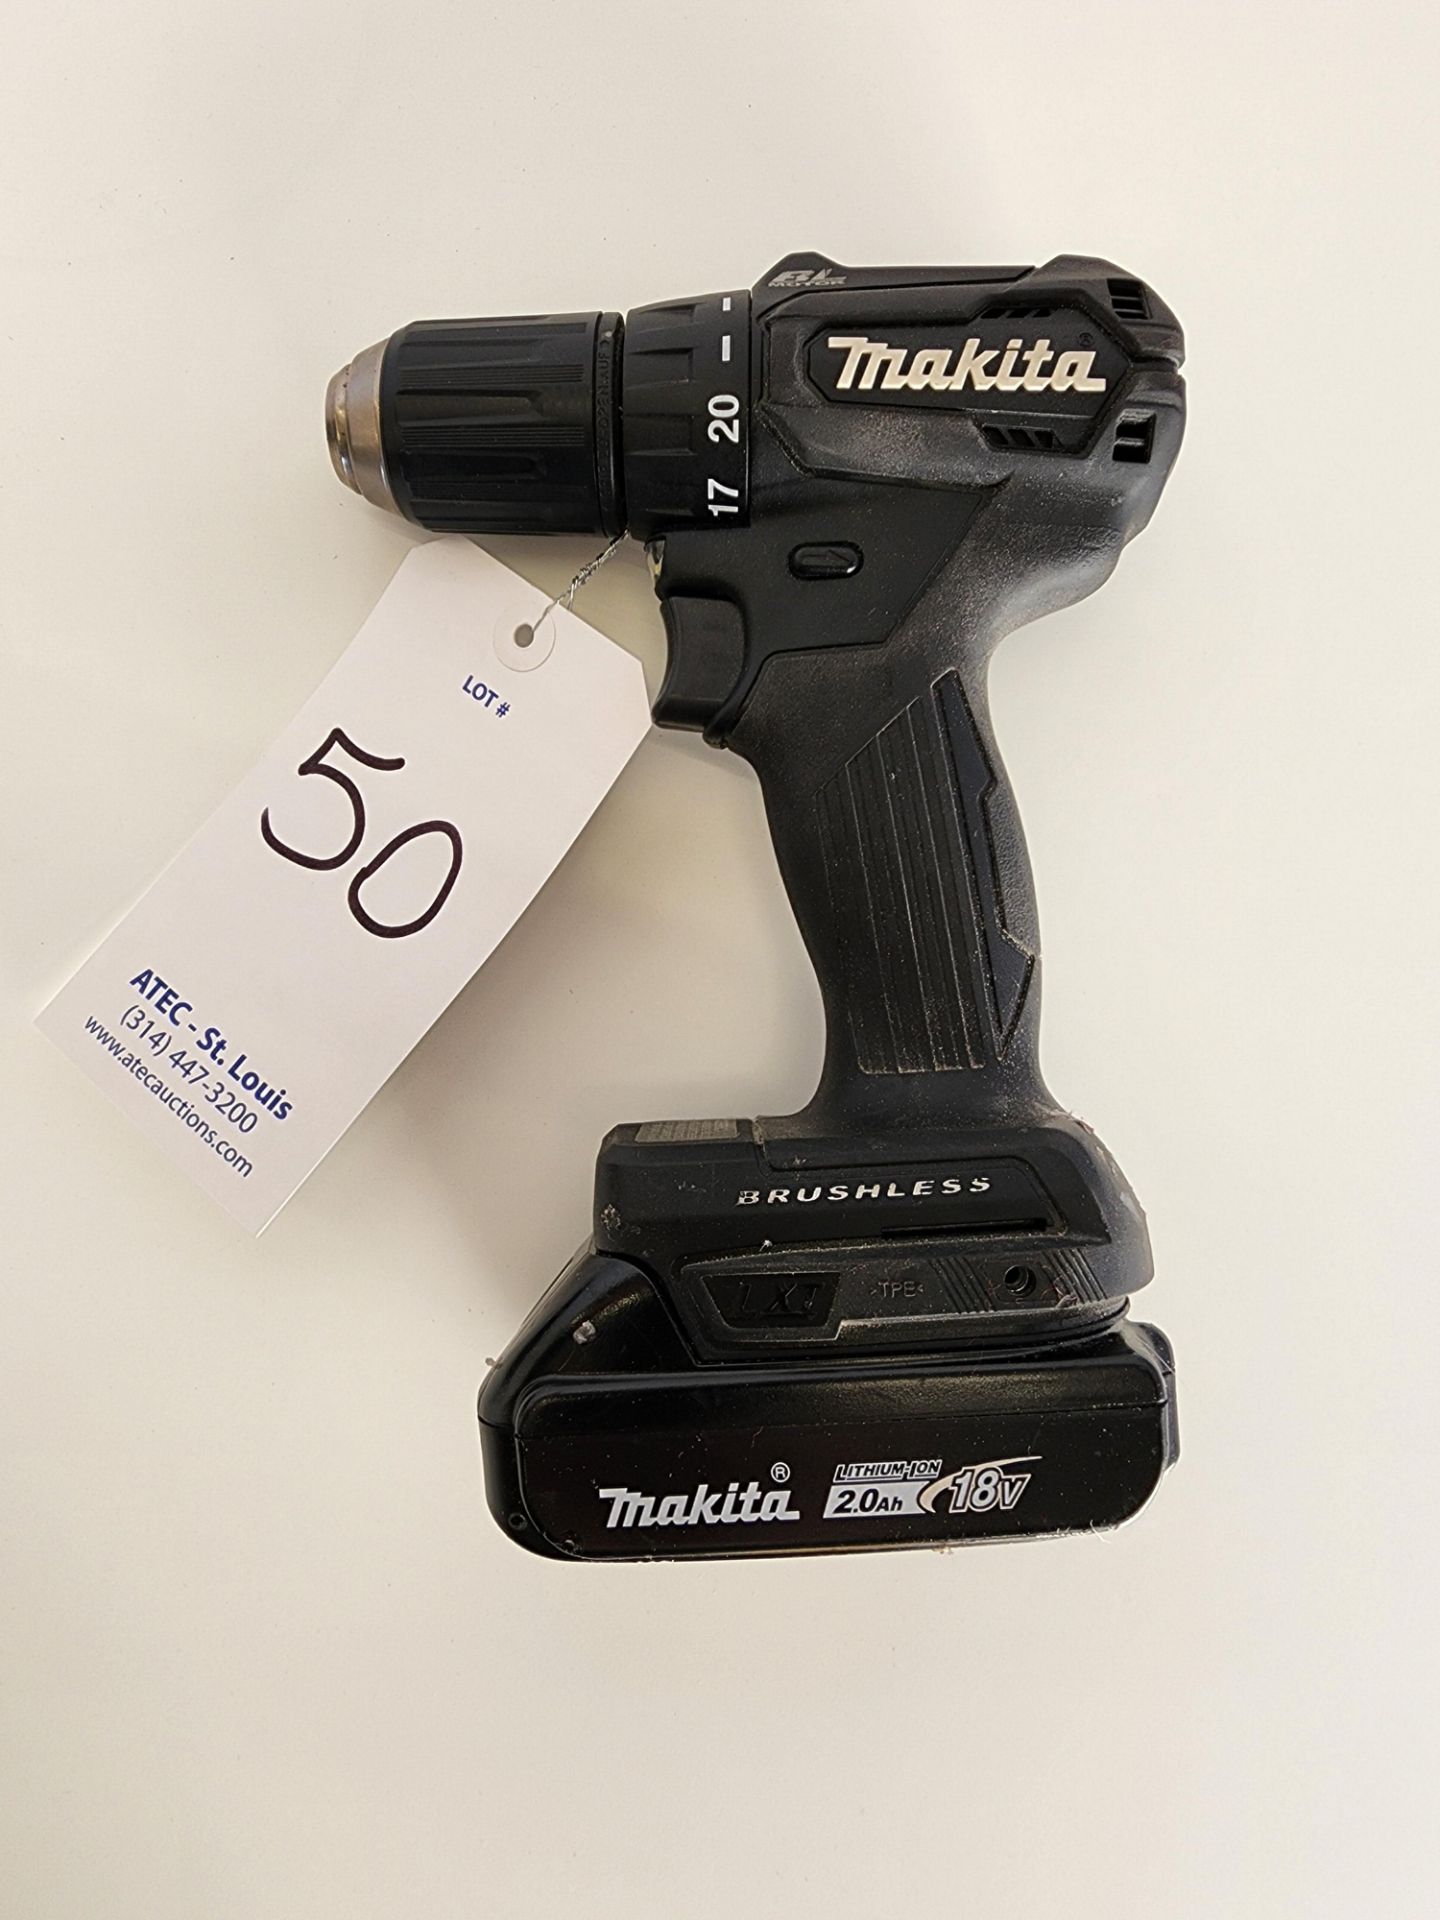 Lot Consisting of Makita Model XFD11 Sub-Compact Brushless 1/2" Driver Drill w/DC18RC Battery - Image 2 of 4